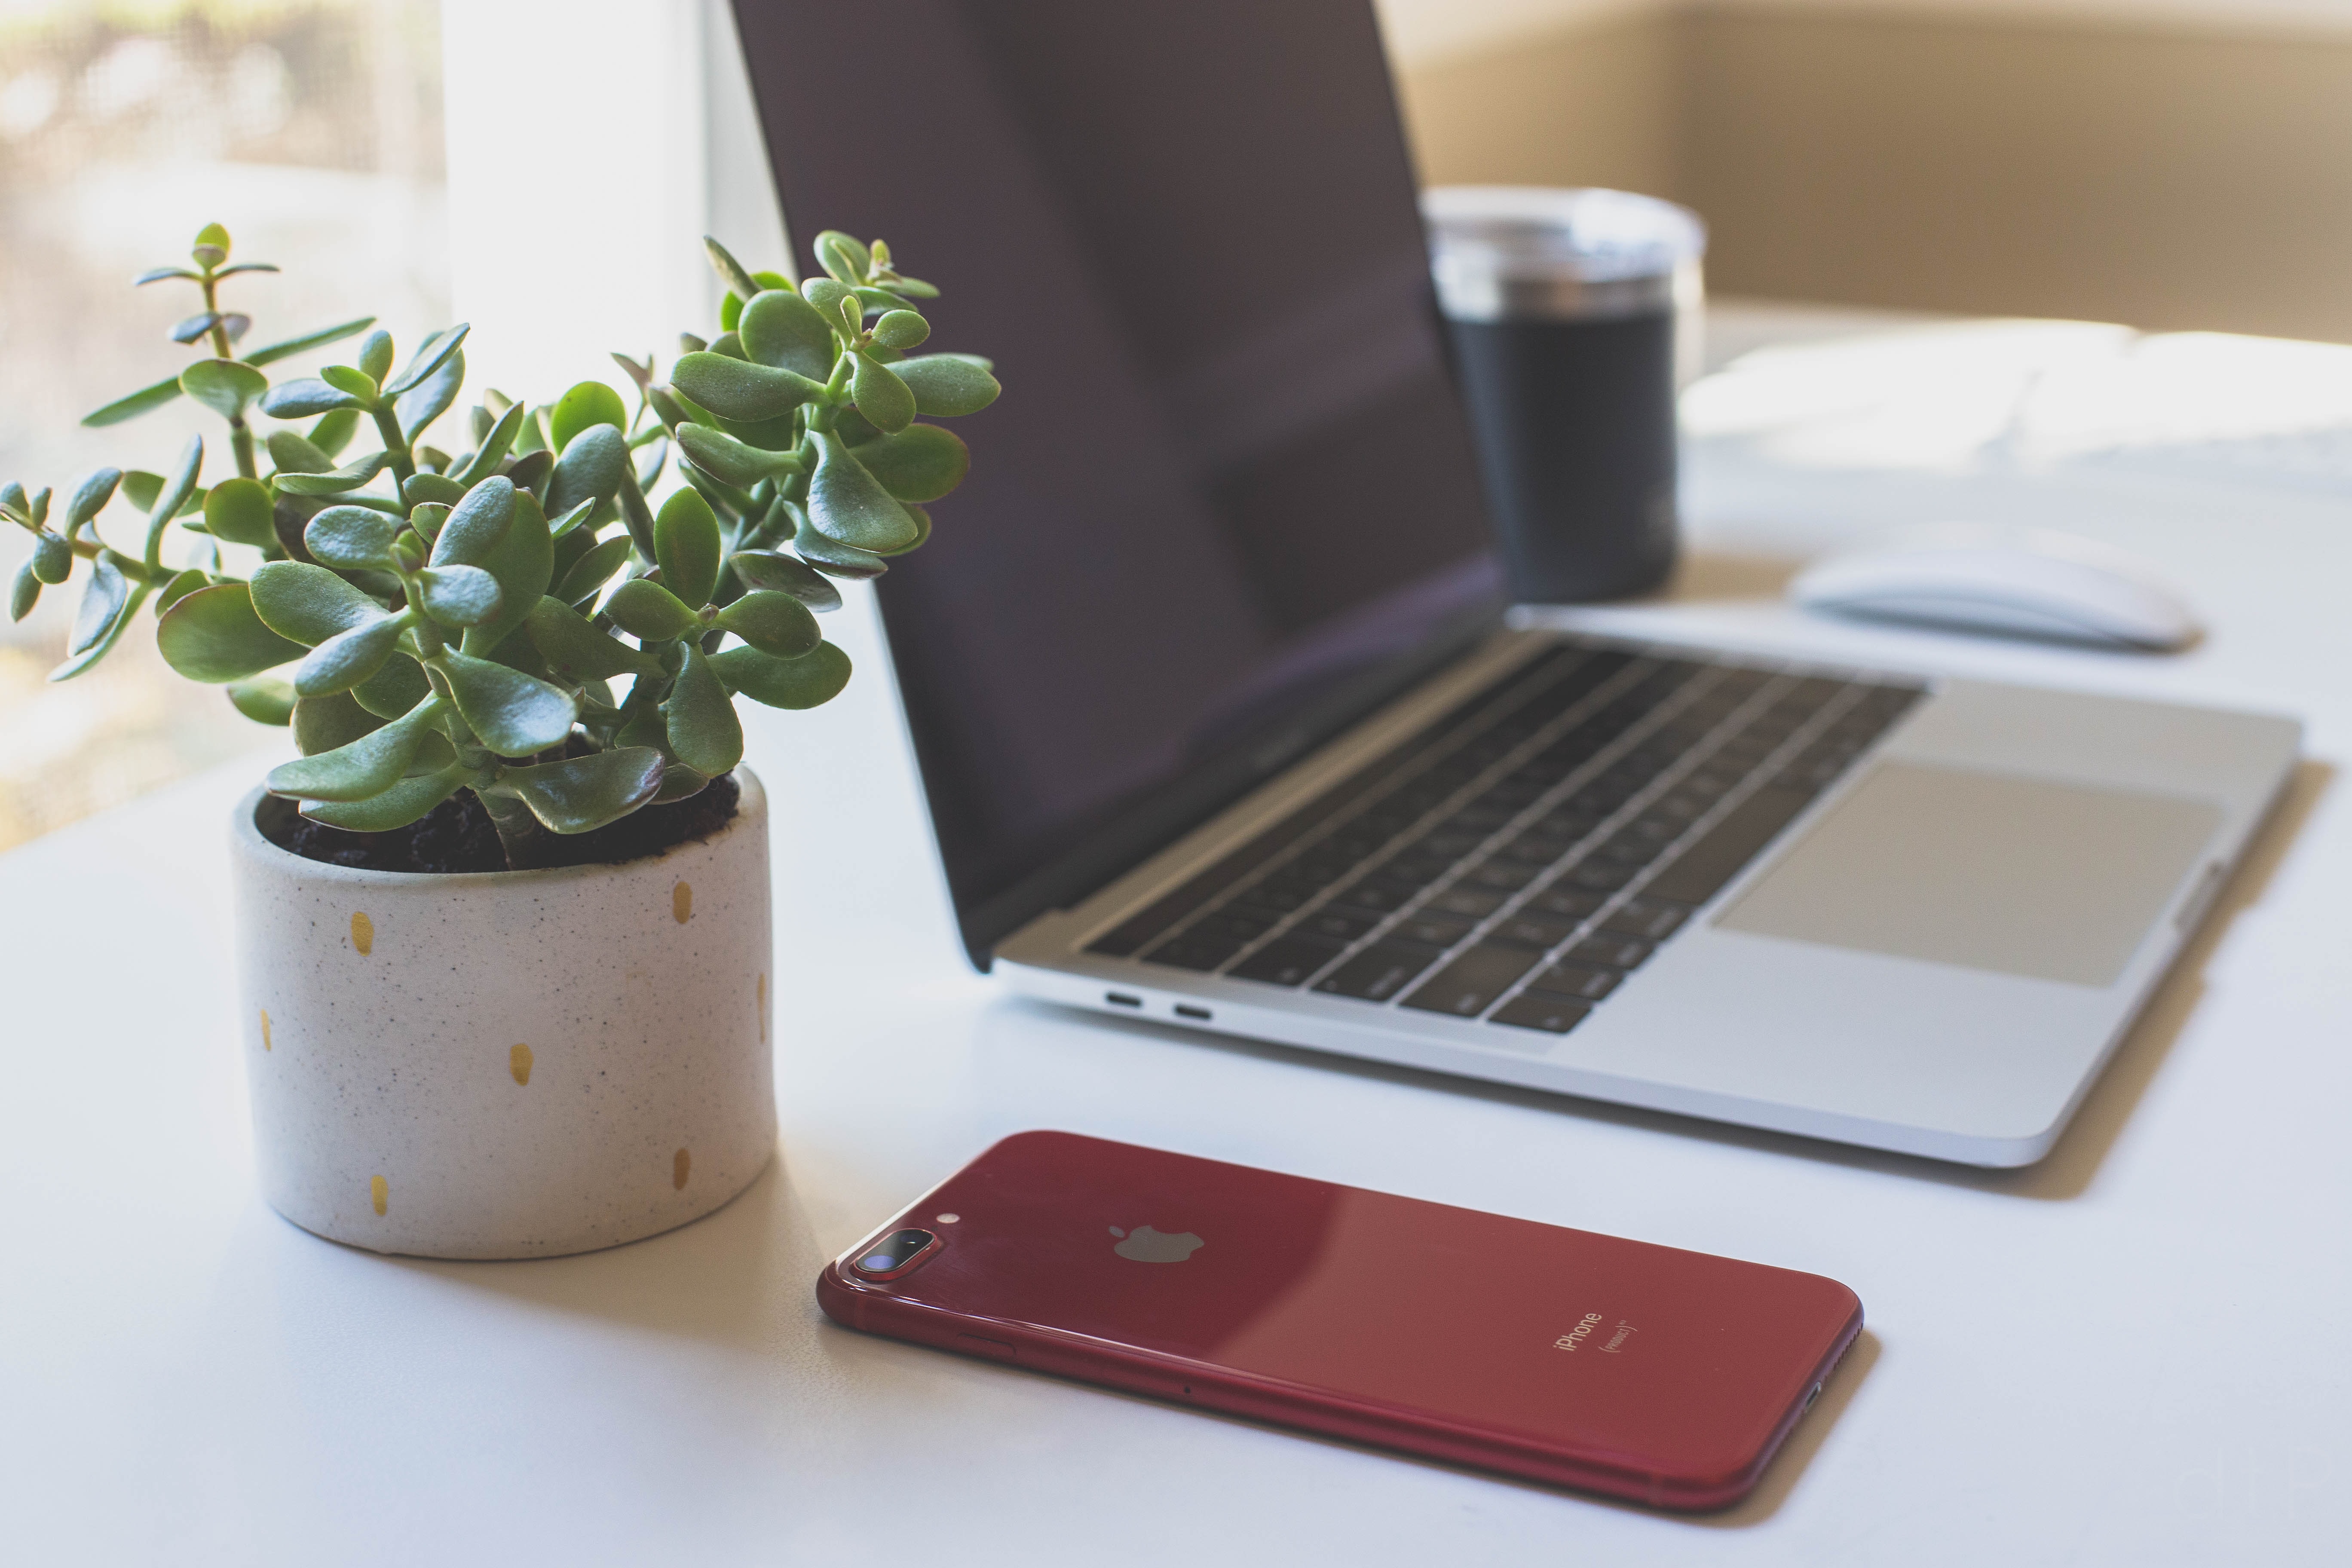 Plant, laptop, red phone